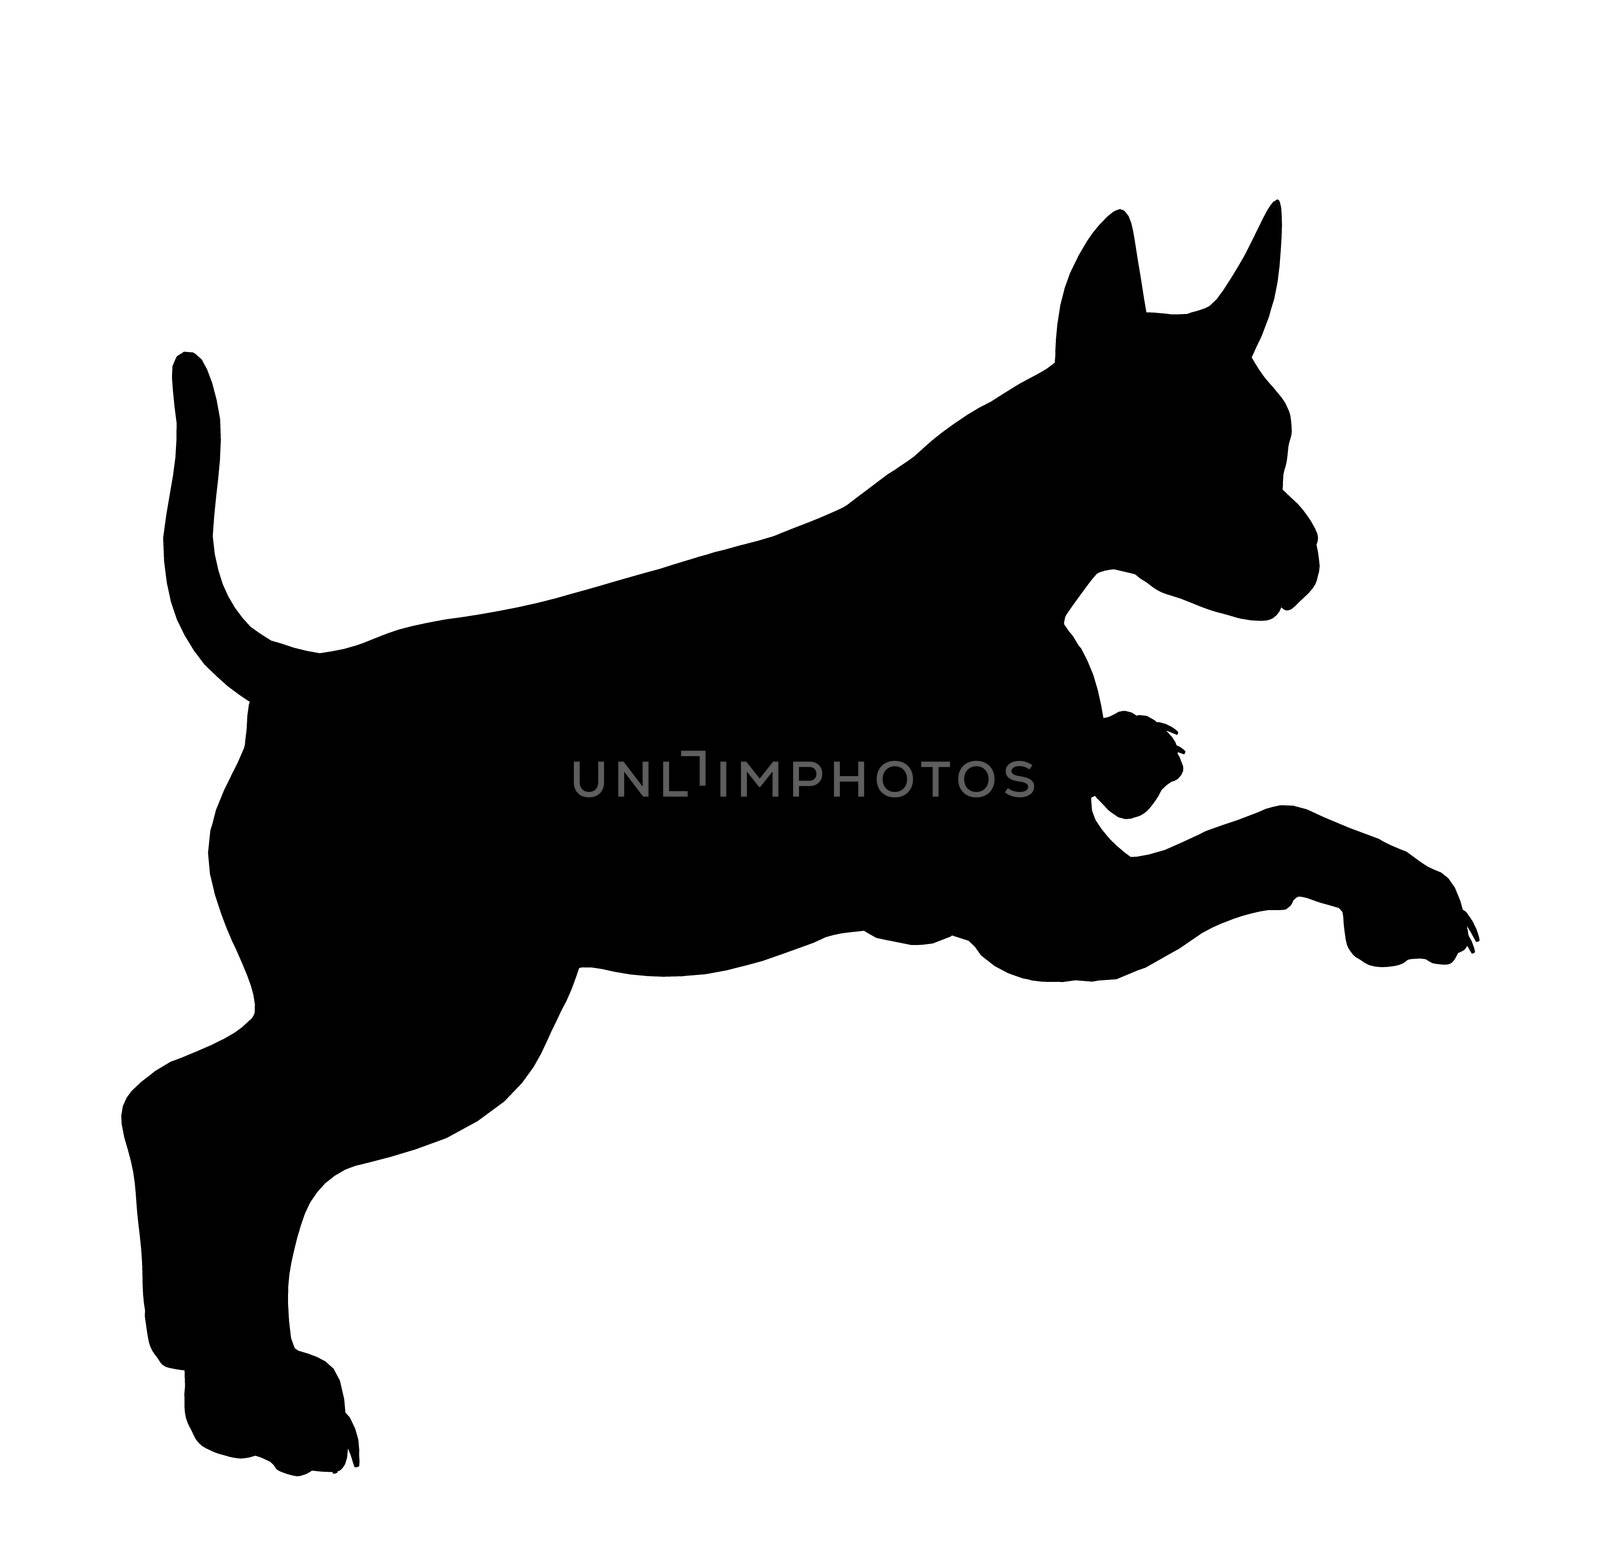 Puppy Dog Illustration Silhouette by kathygold